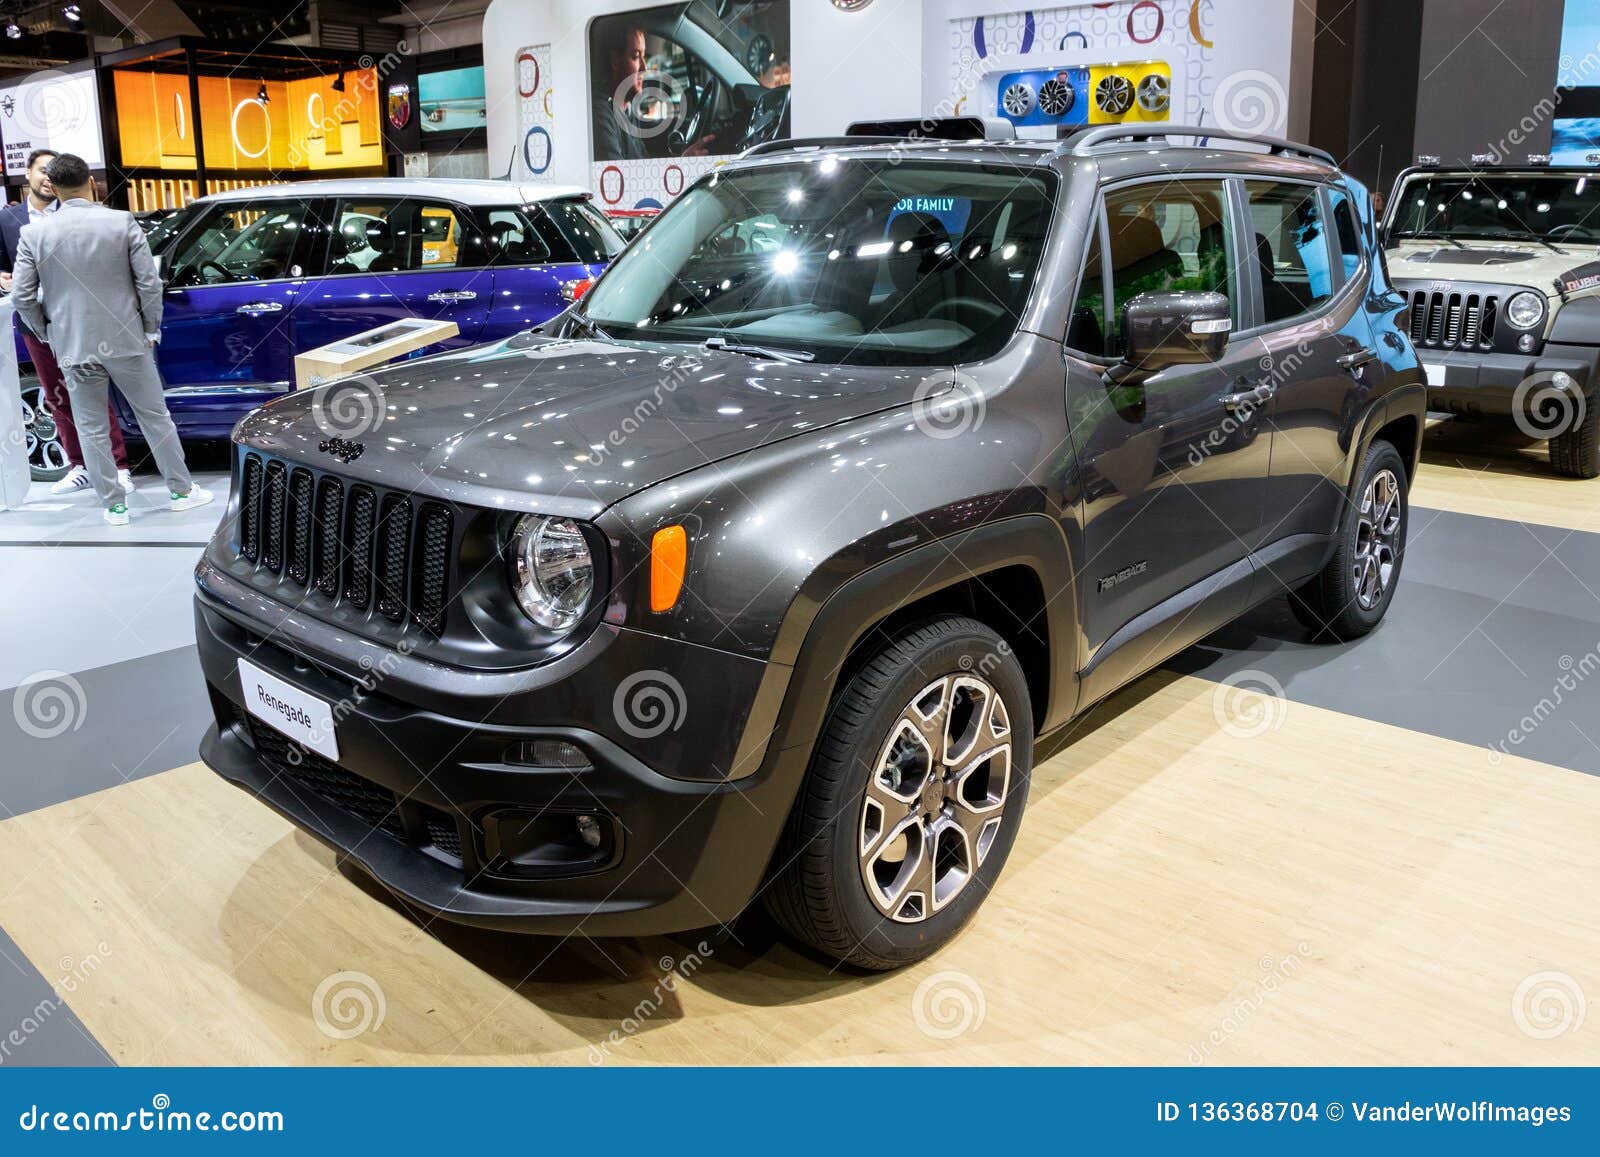 Jeep Renegade Compact Crossover Car Showcased at the Brussels Expo  Editorial Stock Image - Image of autoshow, autosalon: 136368704